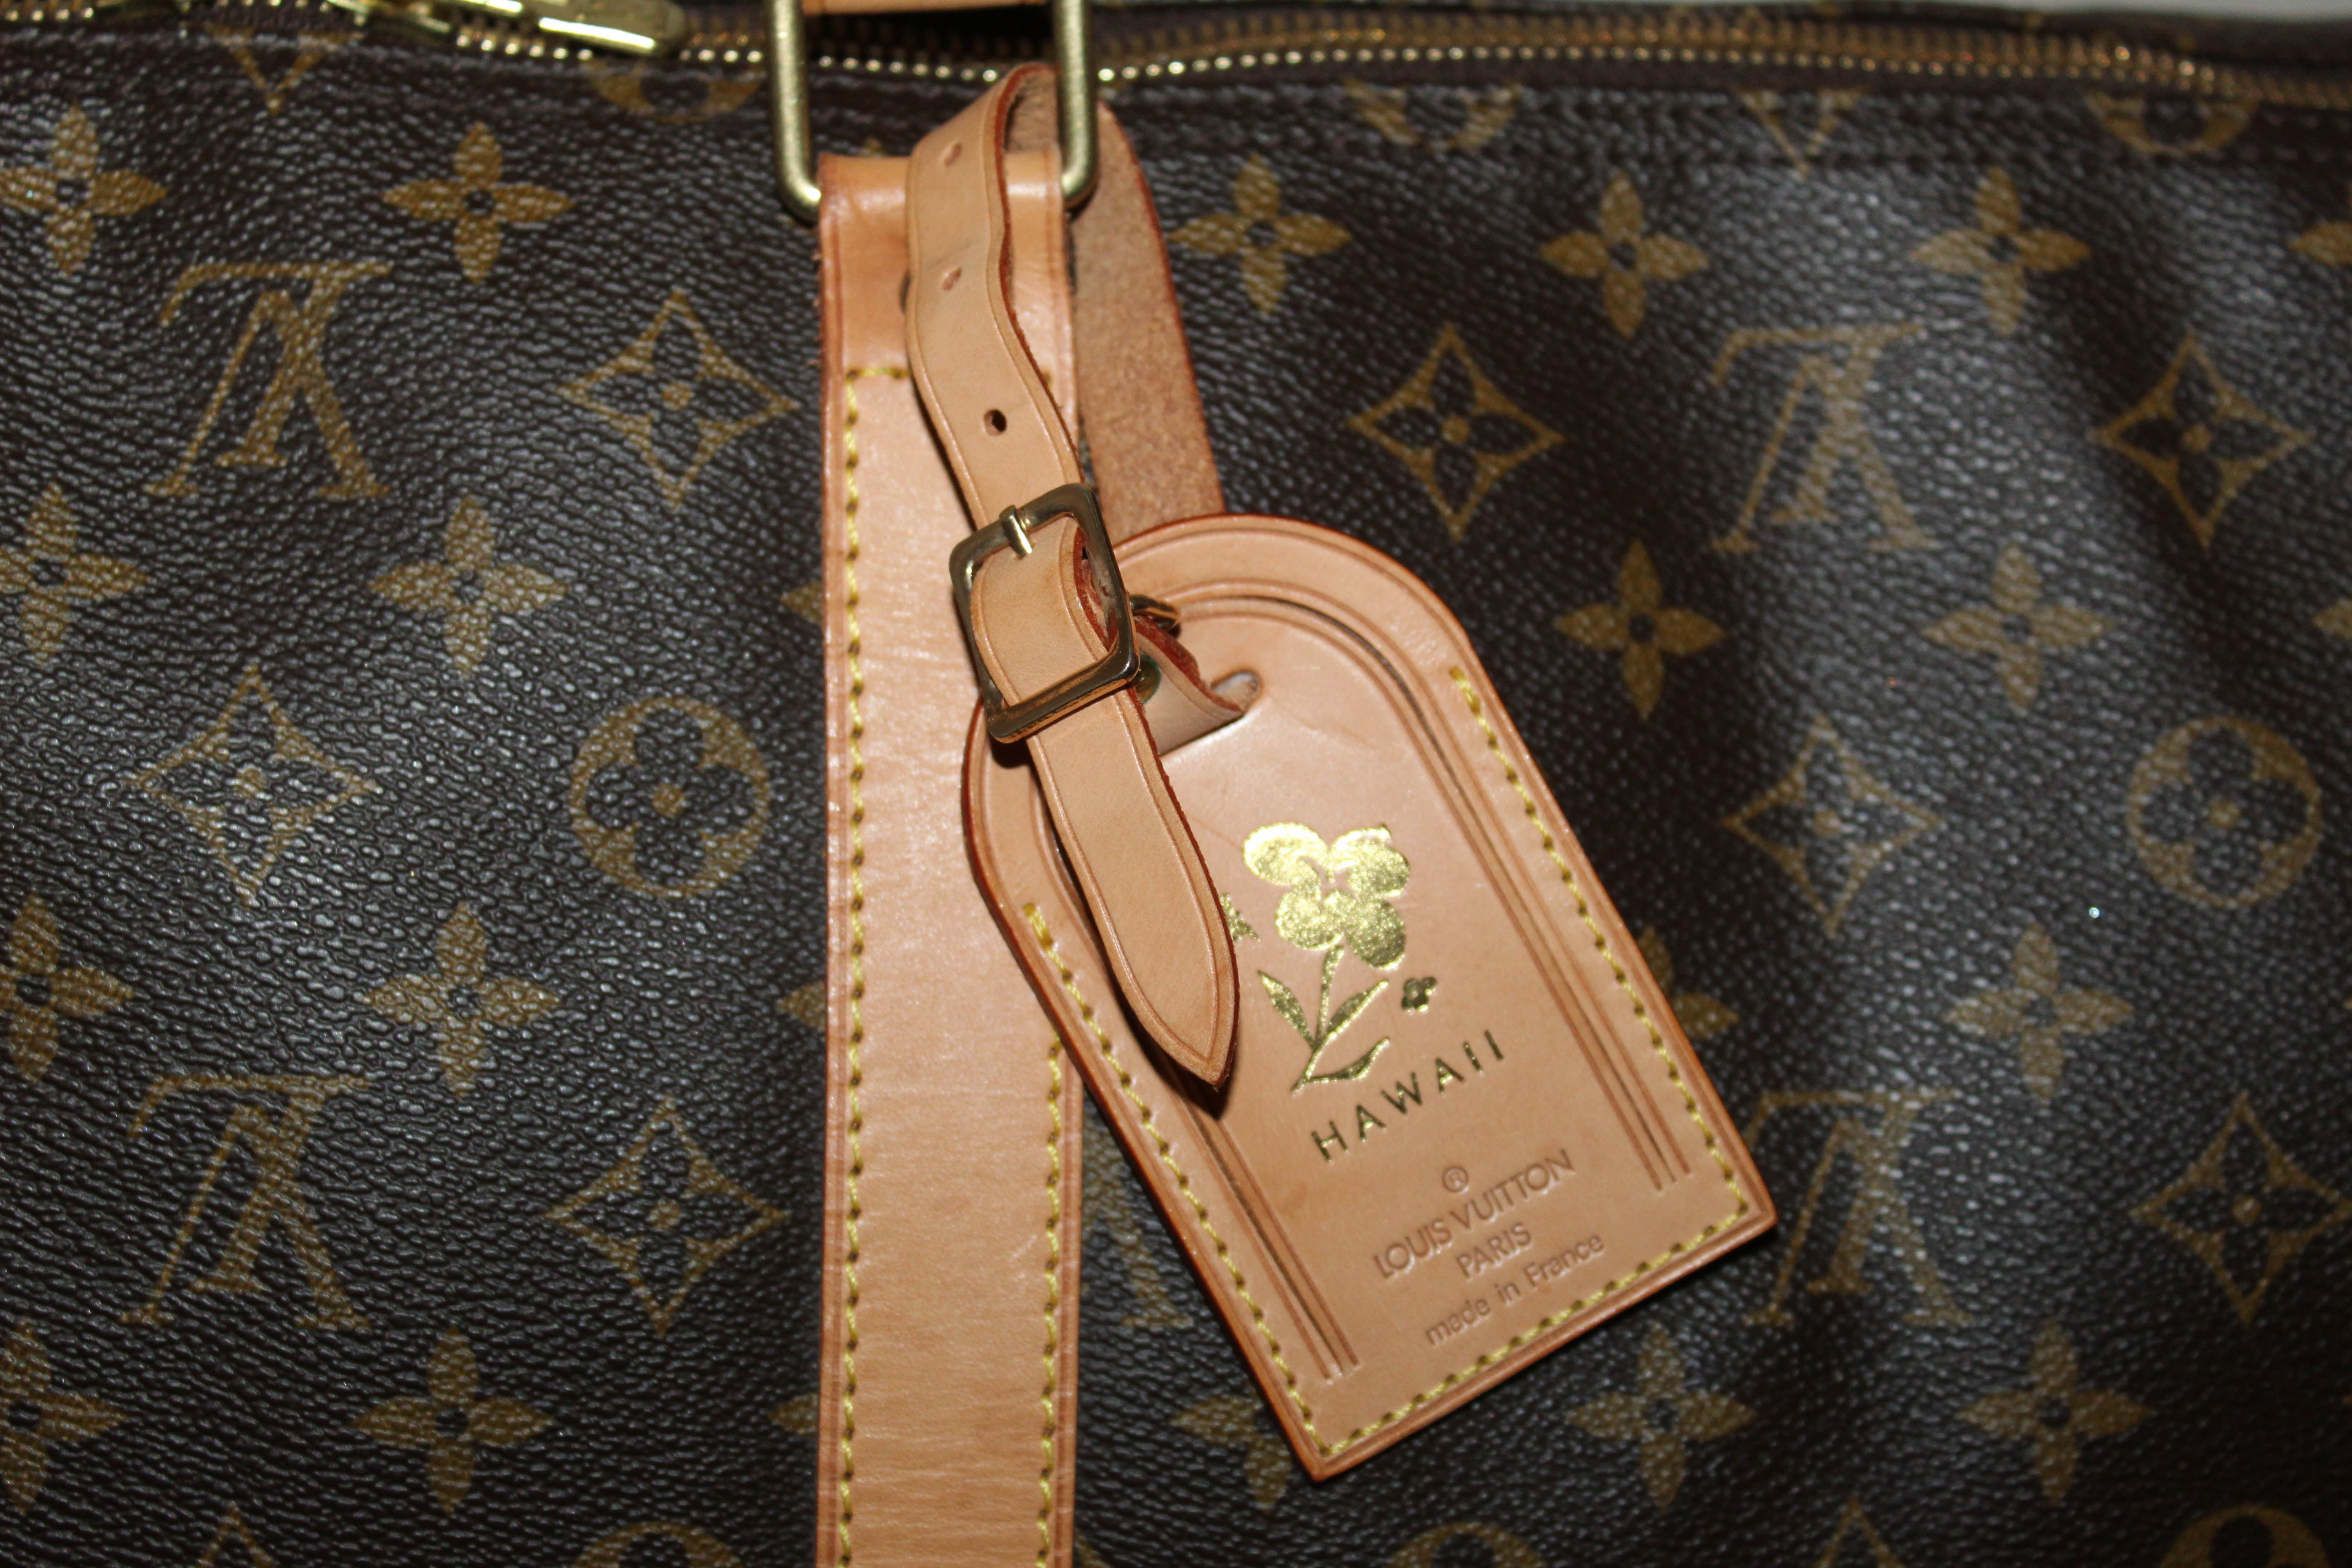 Authentic LOUIS VUITTON Monogram Keepall 55 Carry-on Travel 